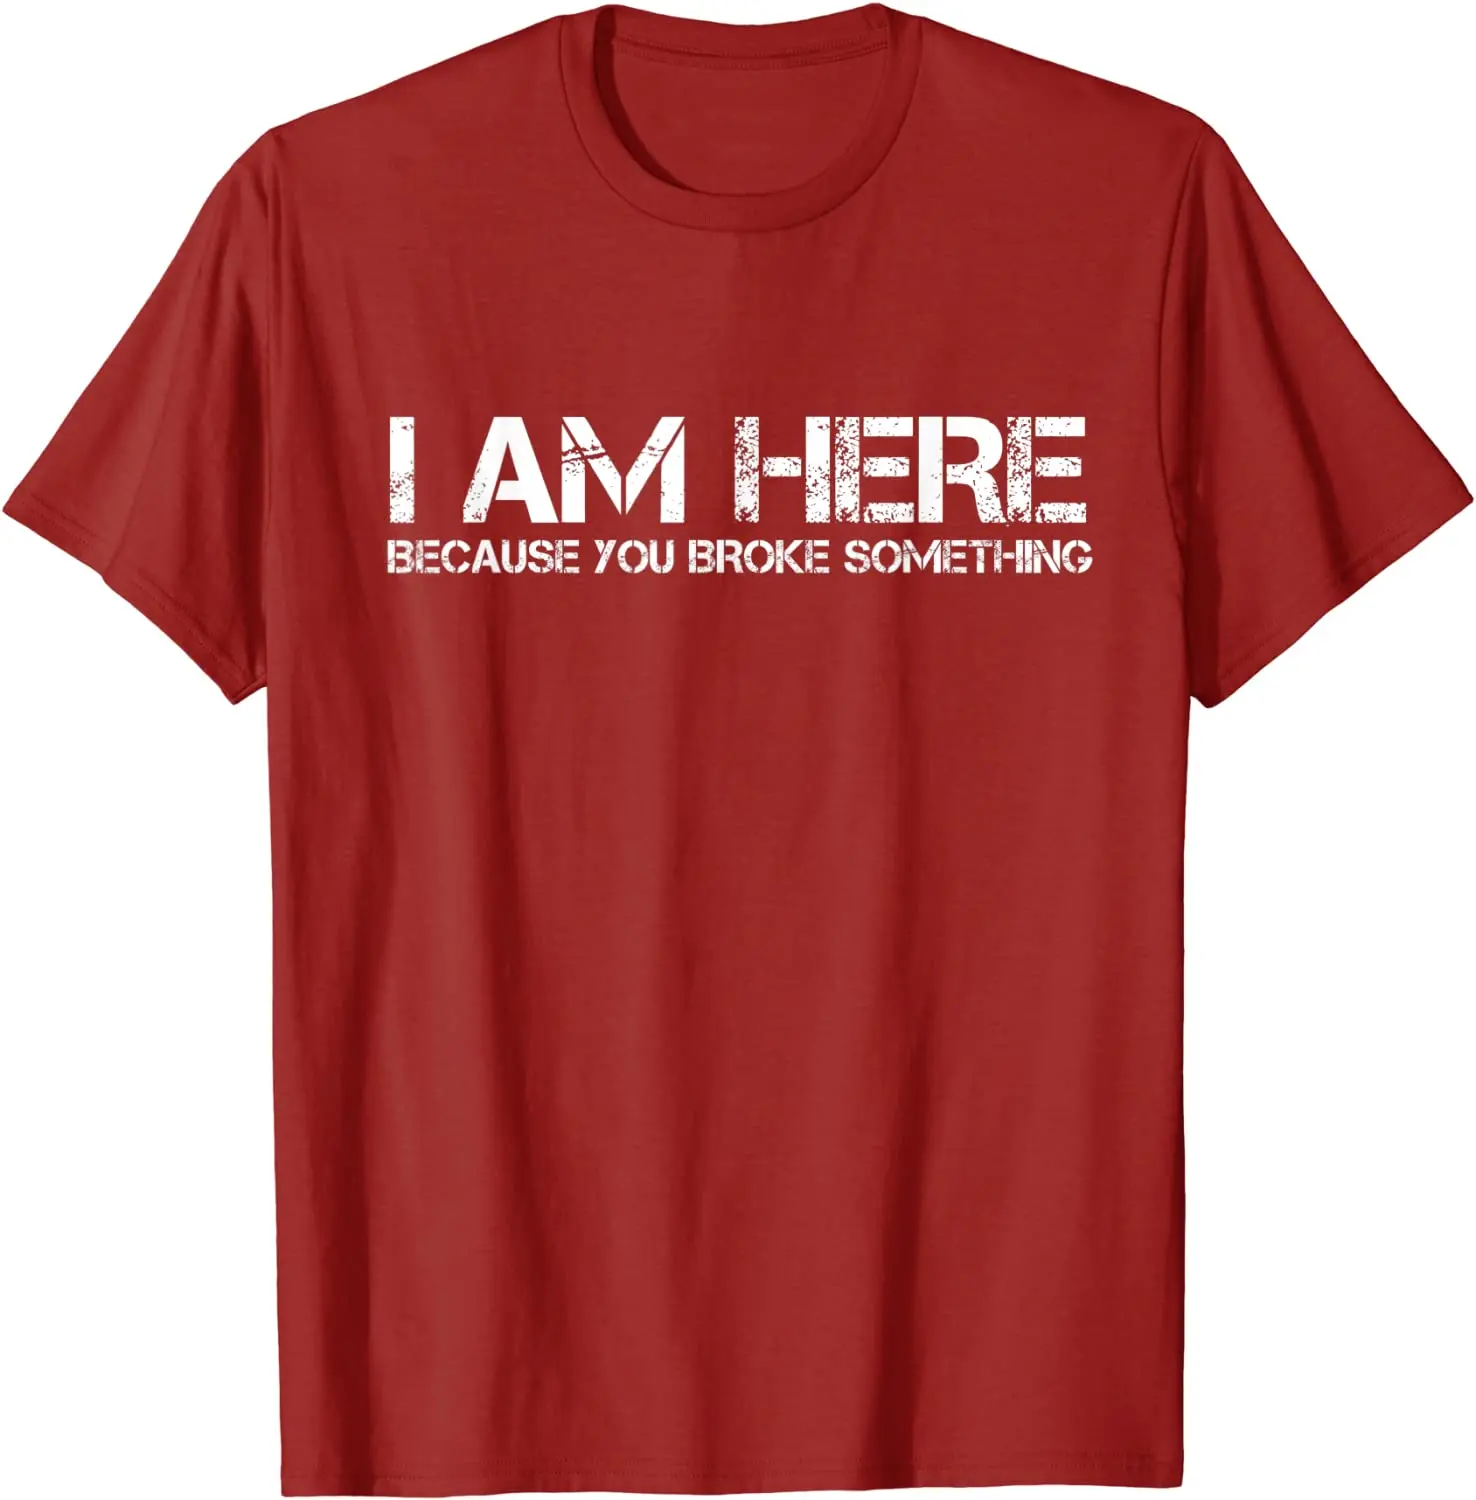 

I Am Here Because You Broke Something Humorous T-Shirt PartyComics Tops Tees Fitted Cotton Men T Shirts